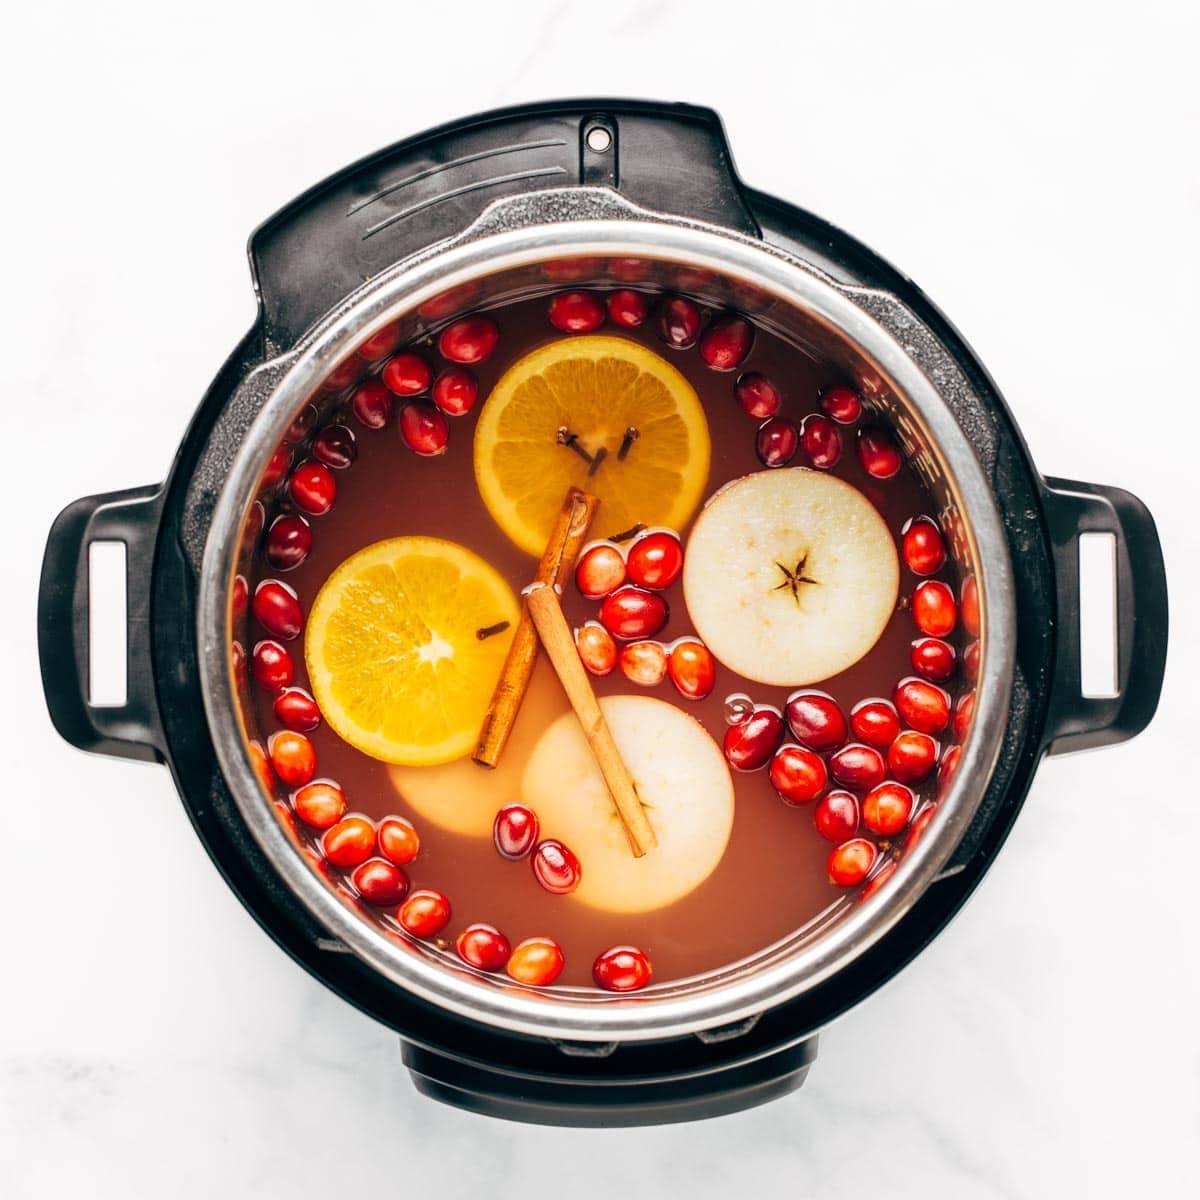 Hot cider in the Instant Pot.